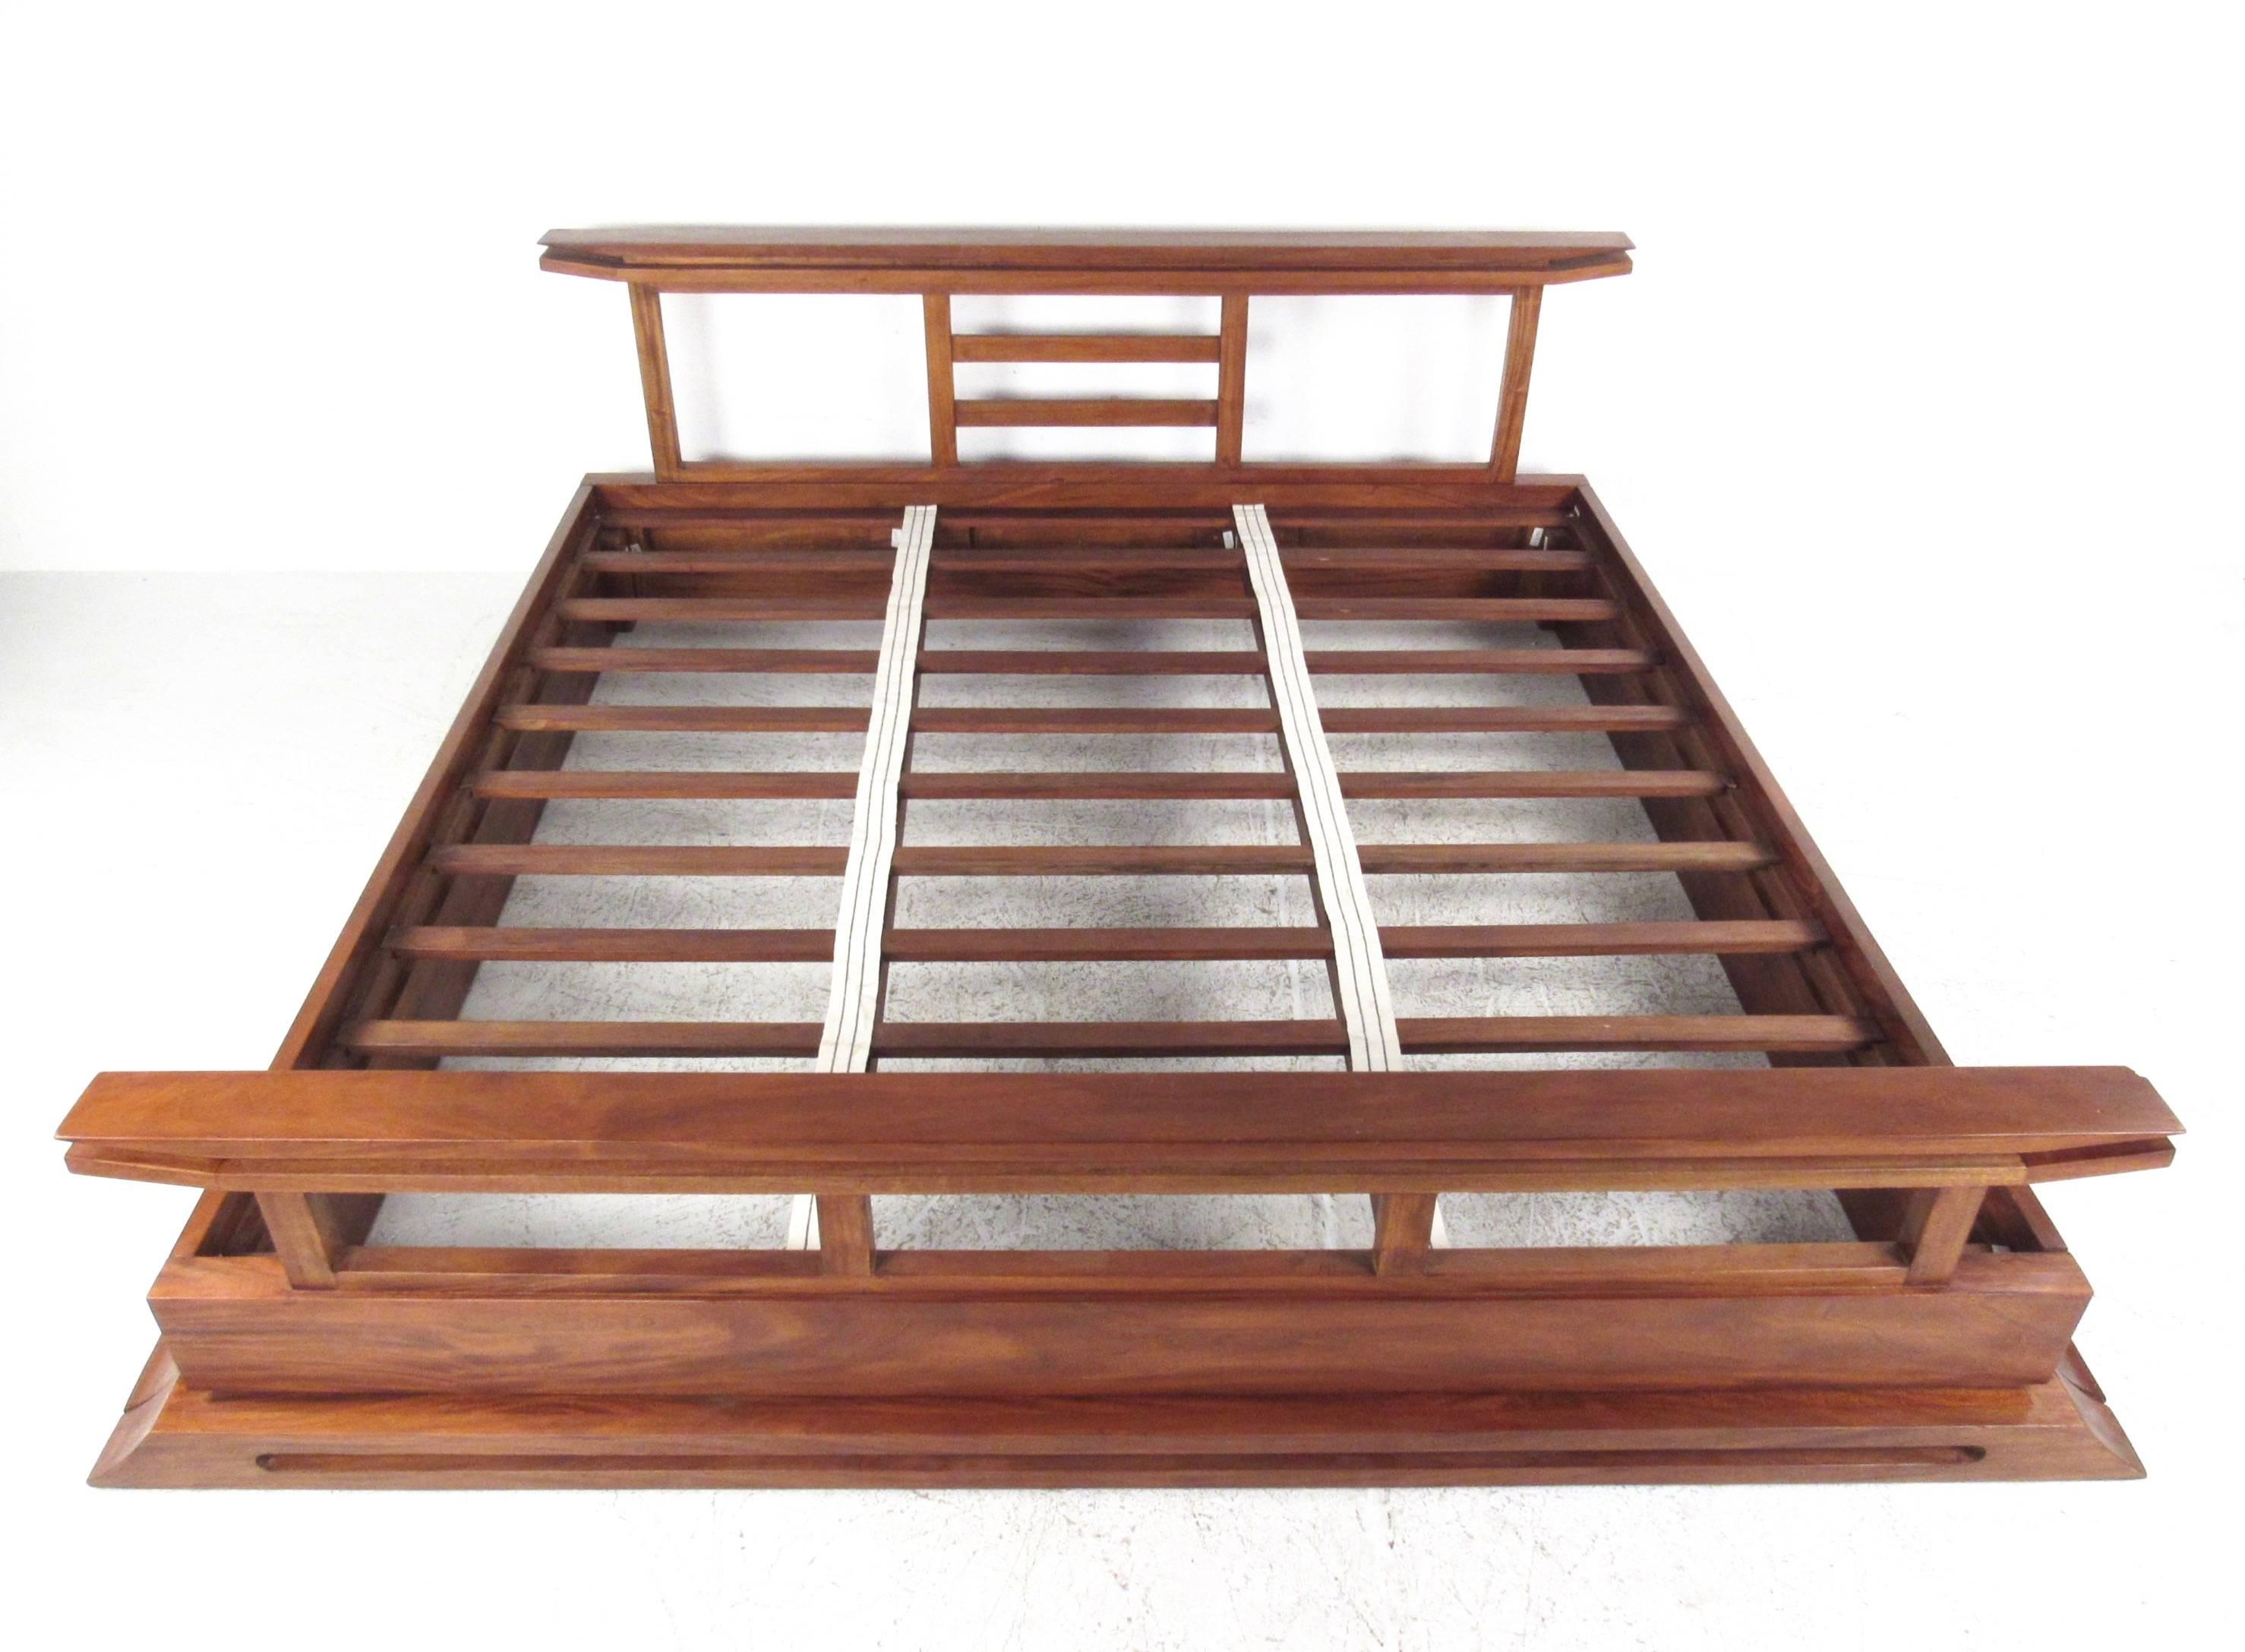 This beautiful asian-influenced teak bed features quality hardwood construction in a wonderfully designed contemporary modern style. Heavy construction includes matching frame with kingsize headboard and foot board, includes slats. Please confirm